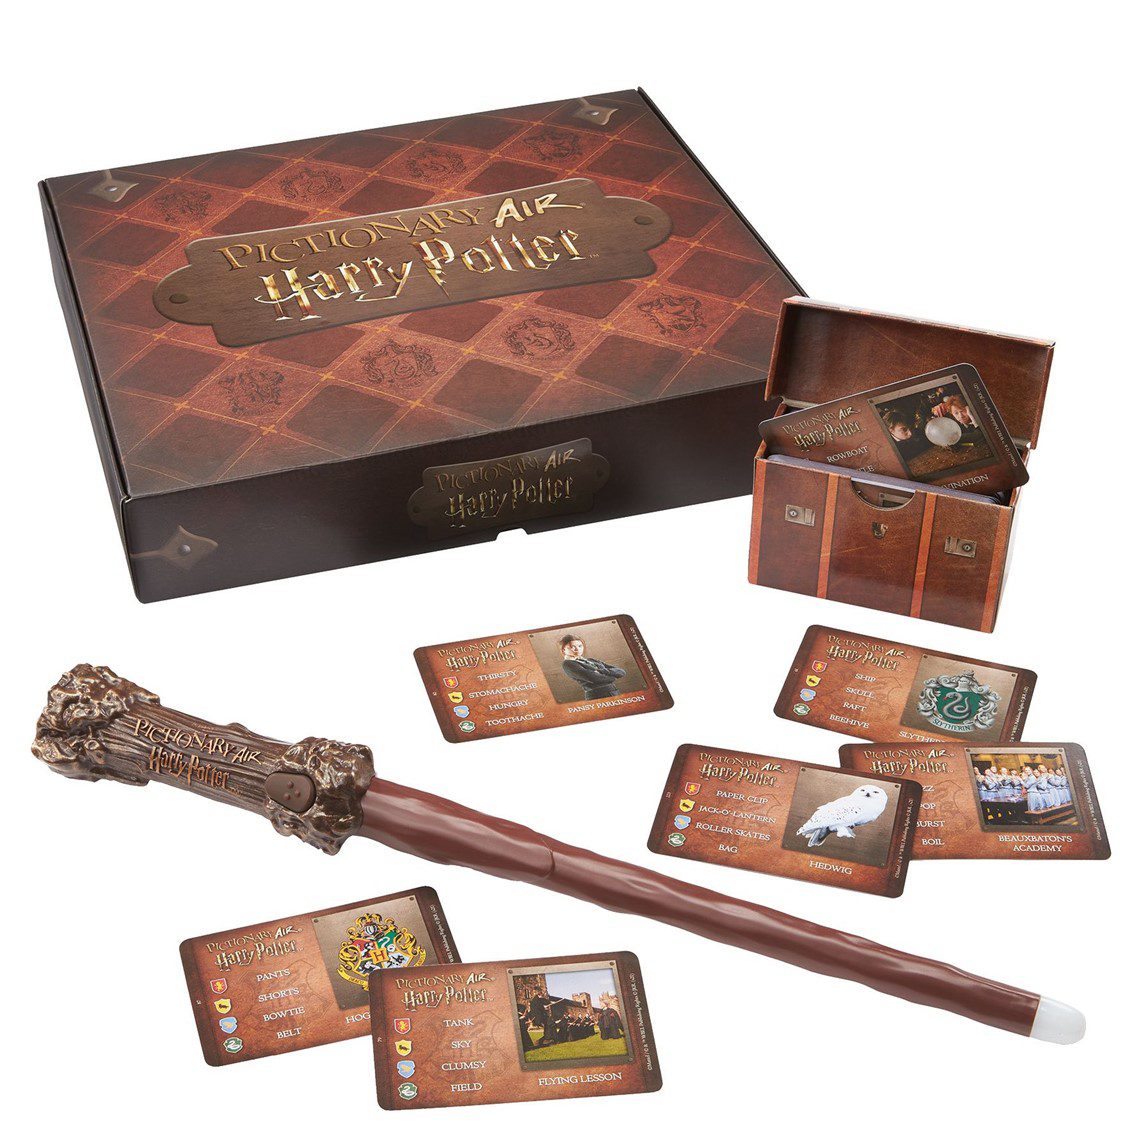 194735020331-PN-HDC62-Cod.-Articulo-MGS0000010886-Juego-mattel-games-pictionary-air-harry-potter-pegi-8-1